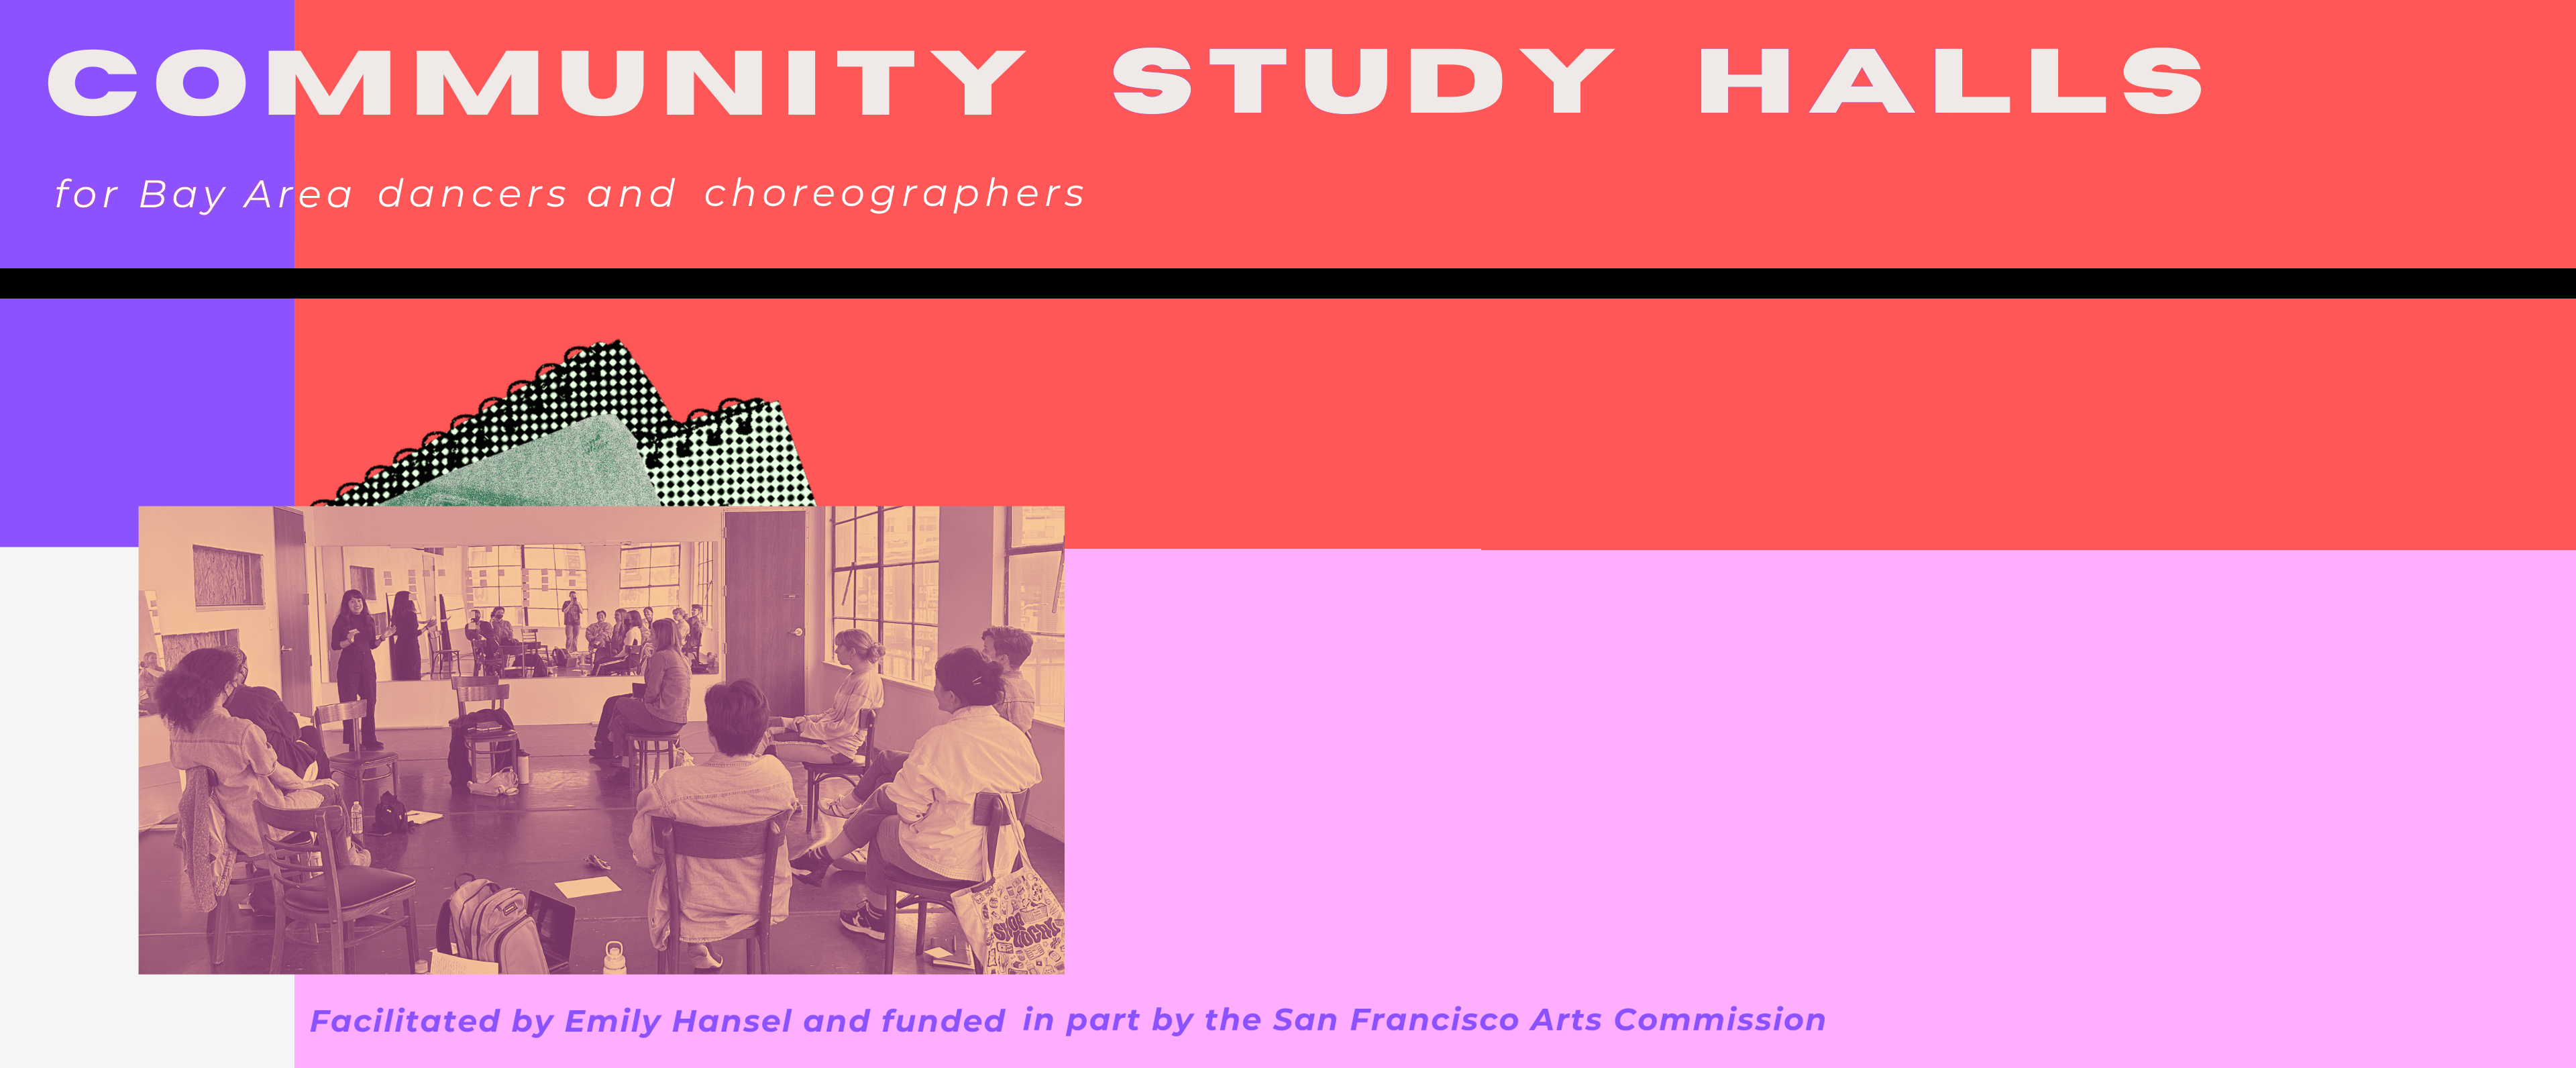 Facilitated by Emily Hansel and funded in part by the San Francisco Arts Commission